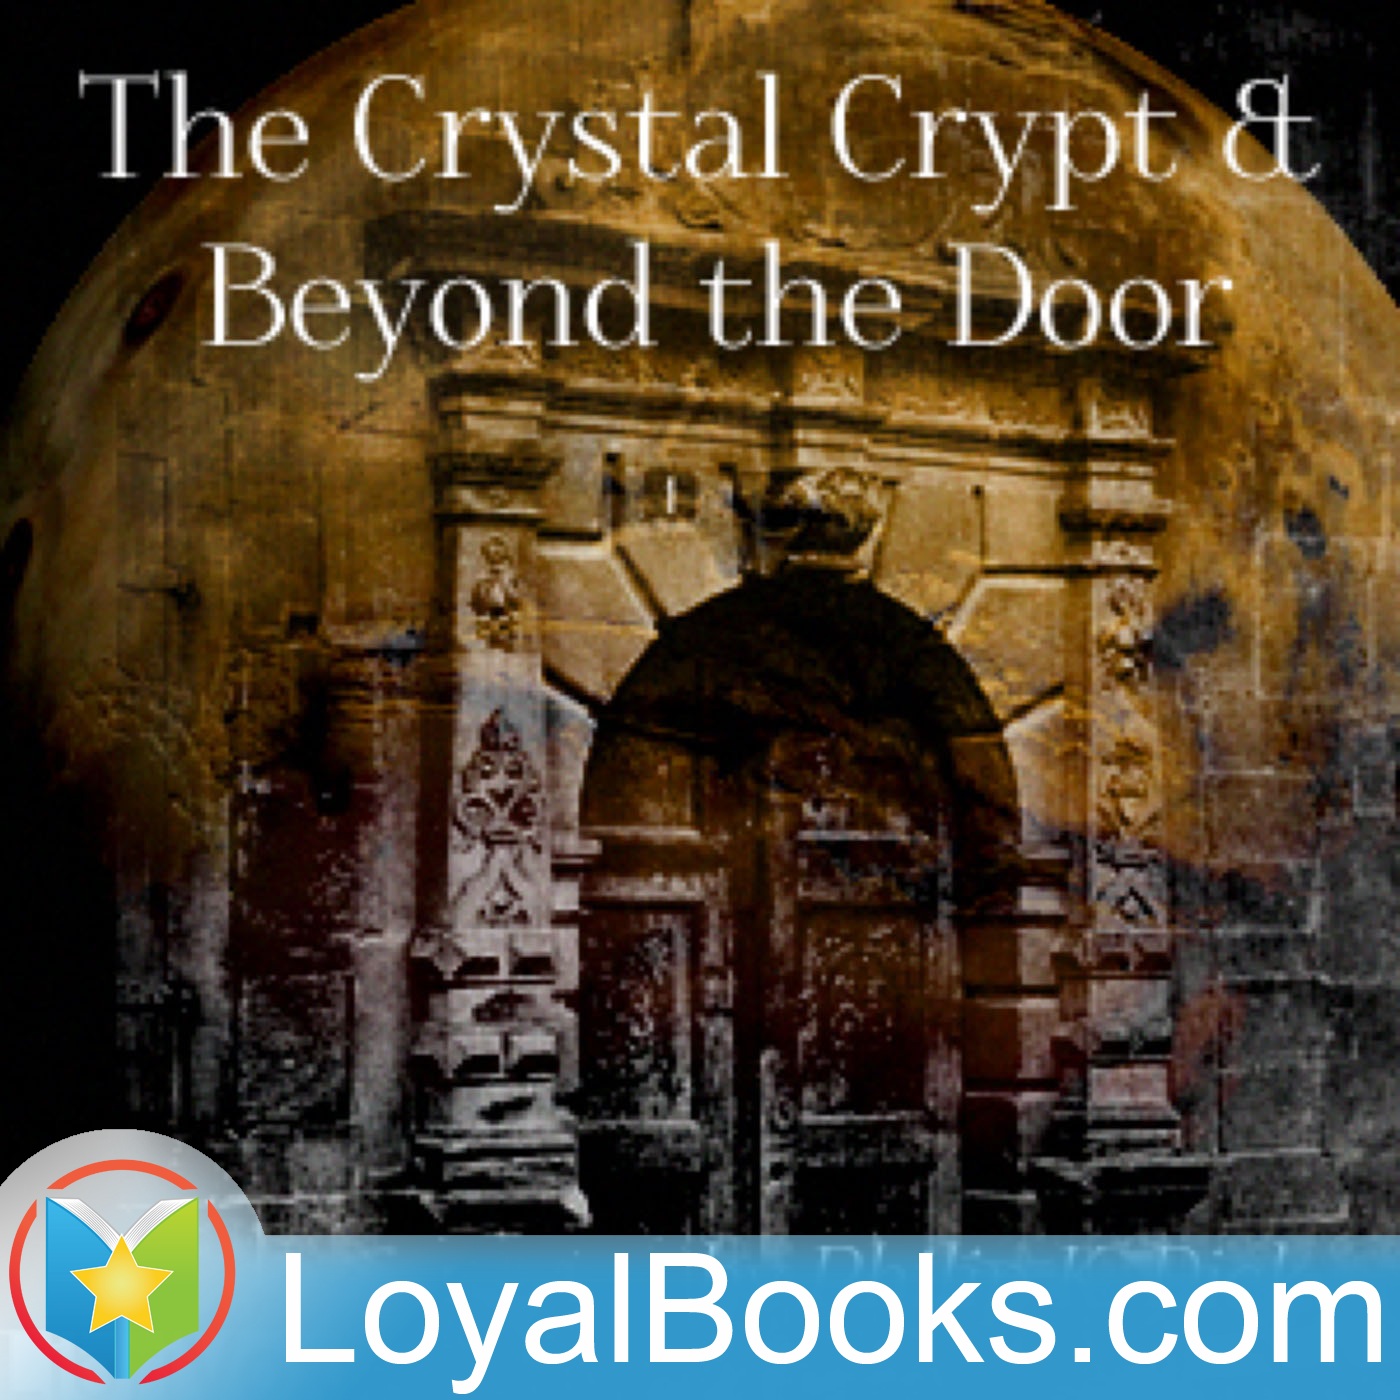 The Crystal Crypt & Beyond the Door by Philip K. Dick